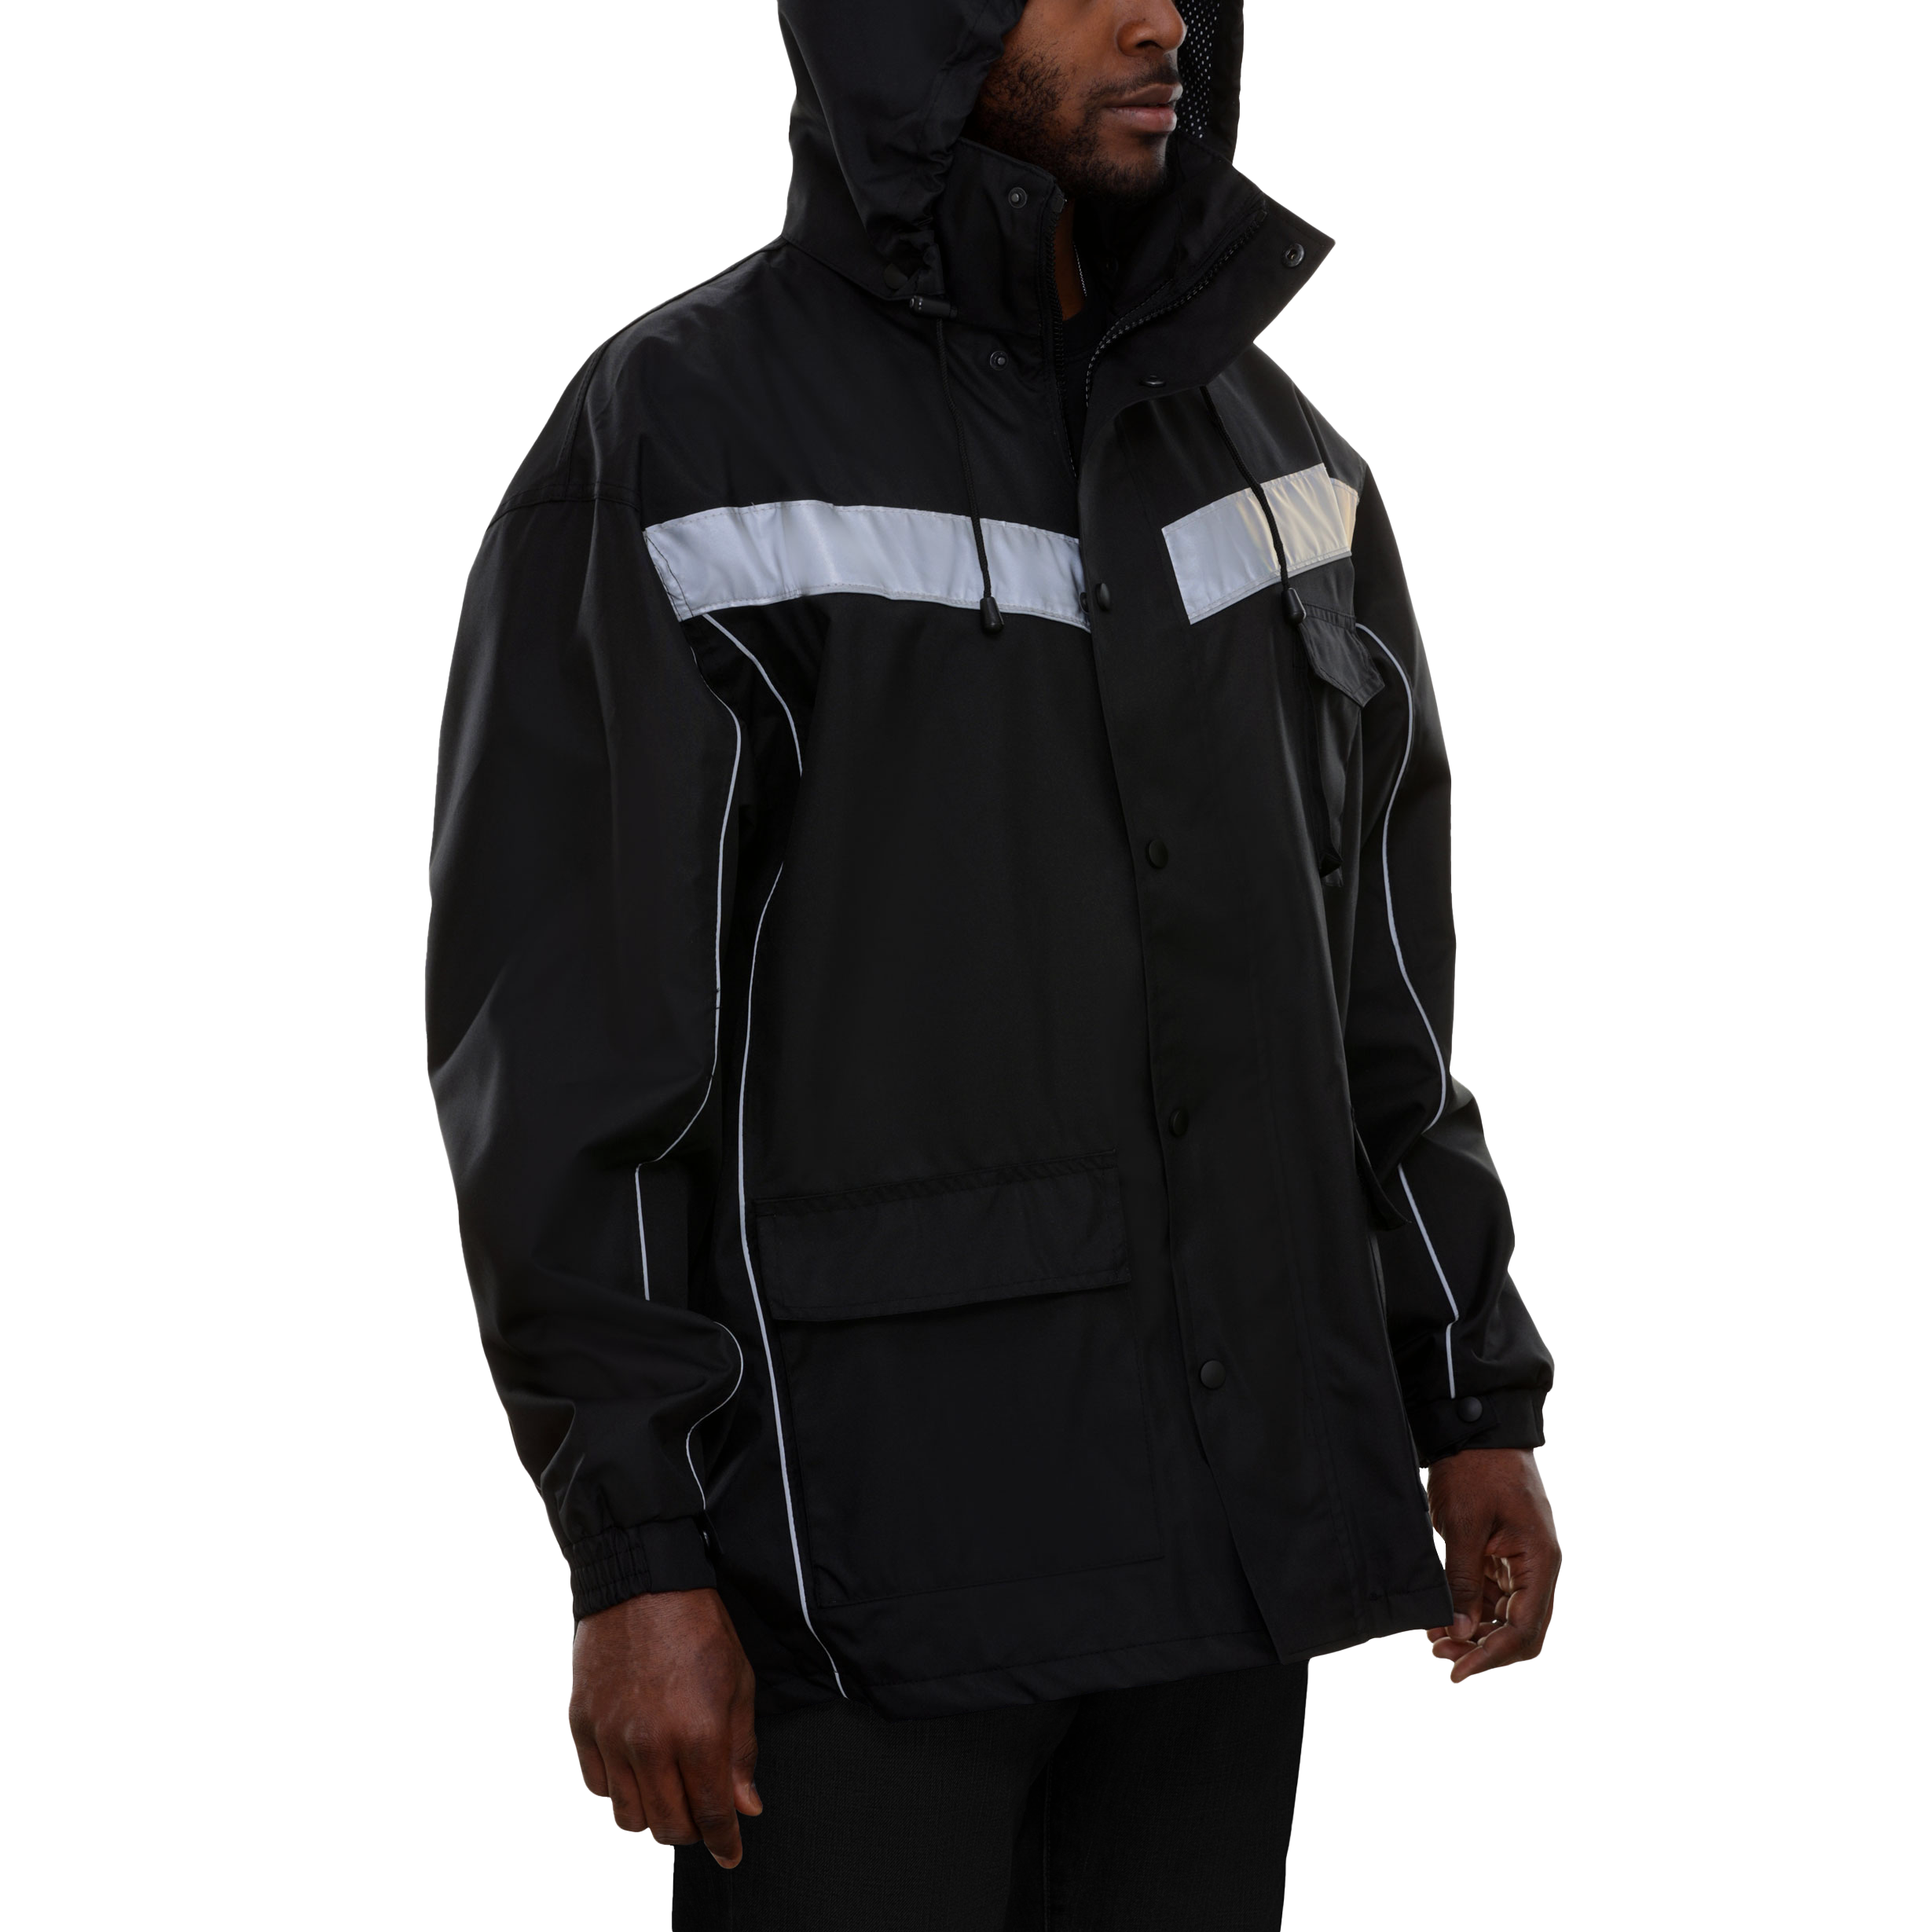 Reflective Jacket Parka Breathable Waterproof Hooded-eSafety Supplies, Inc